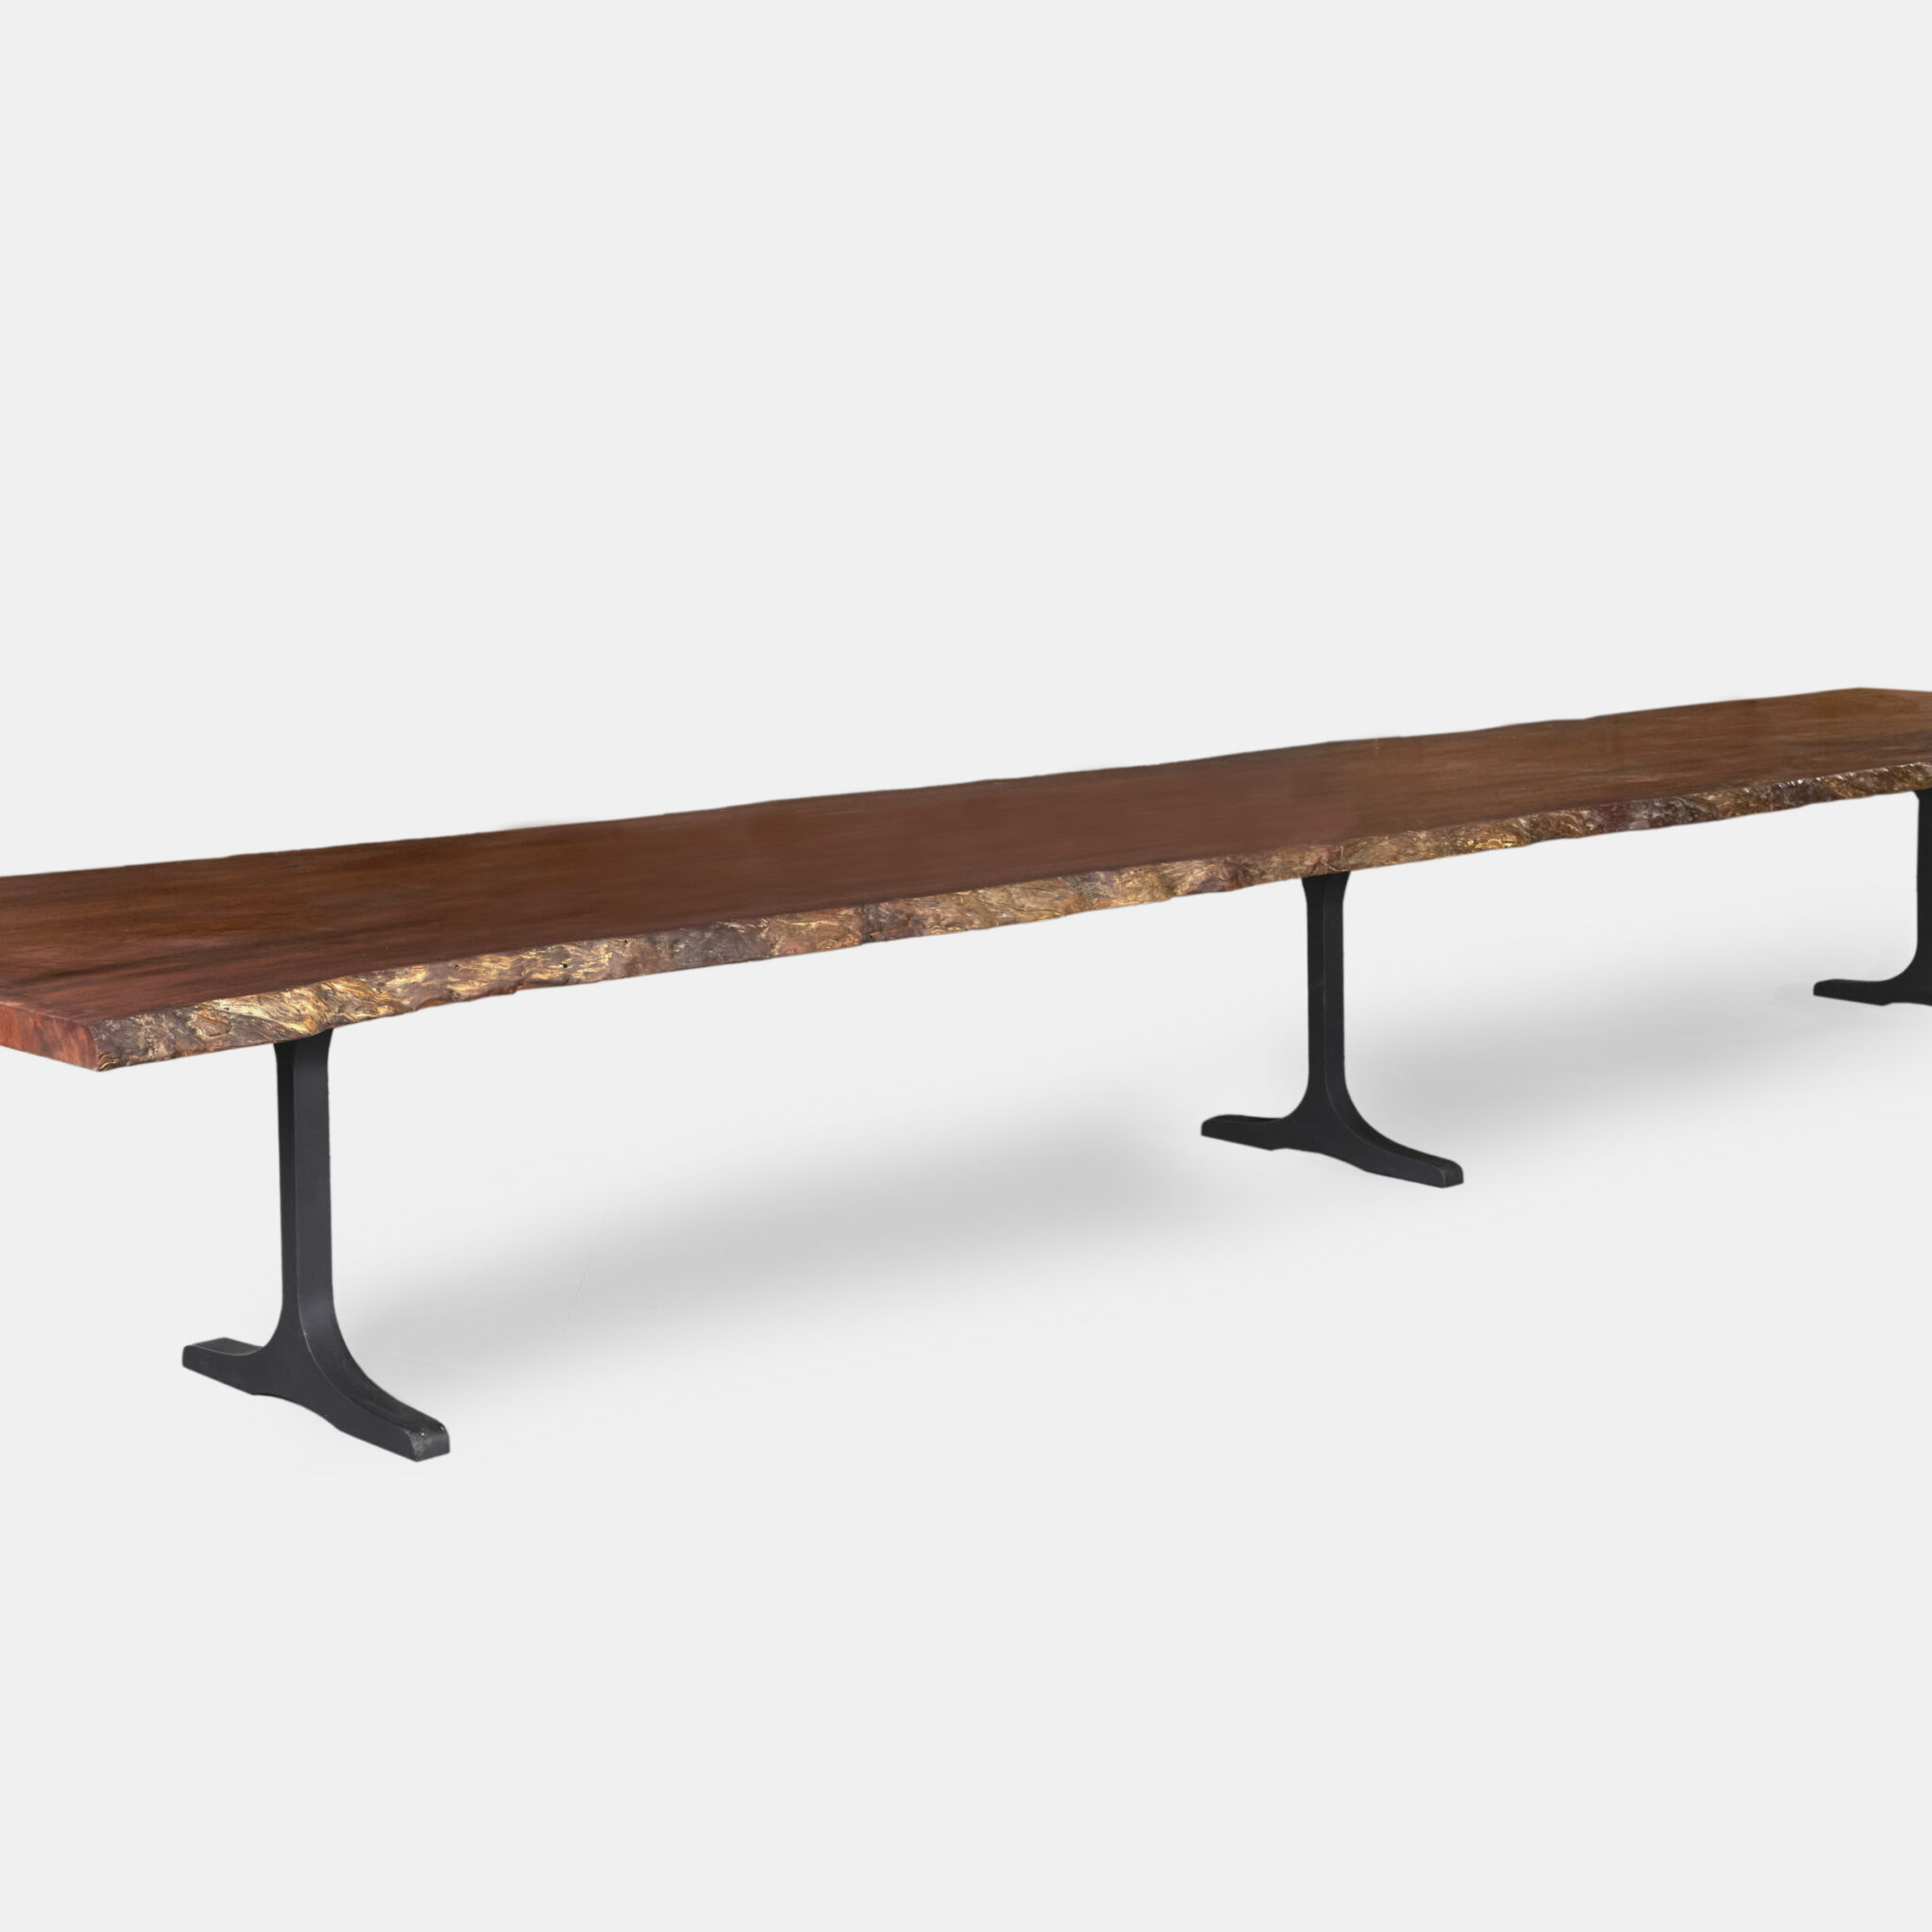 Bellevue Hill Dining Table made of Jarrah timber showcasing its natural beauty and craftsmanship